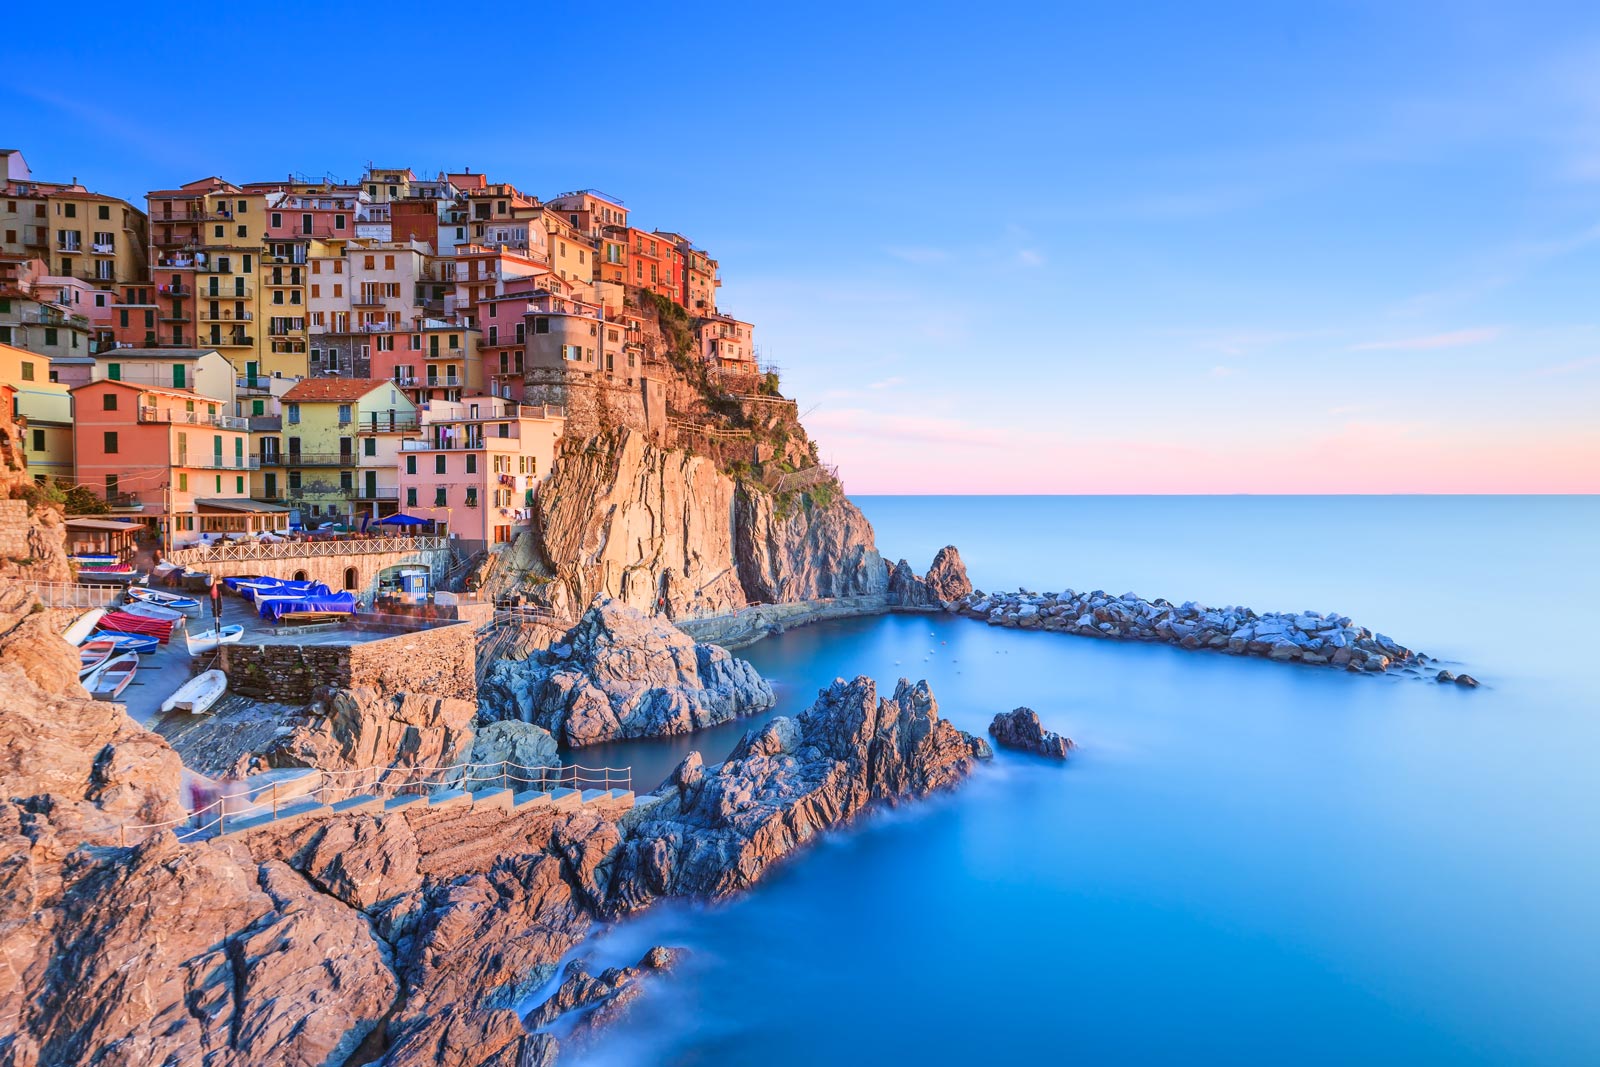 Hiking in Cinque Terre - Complete Guide Italy's 5 Villages